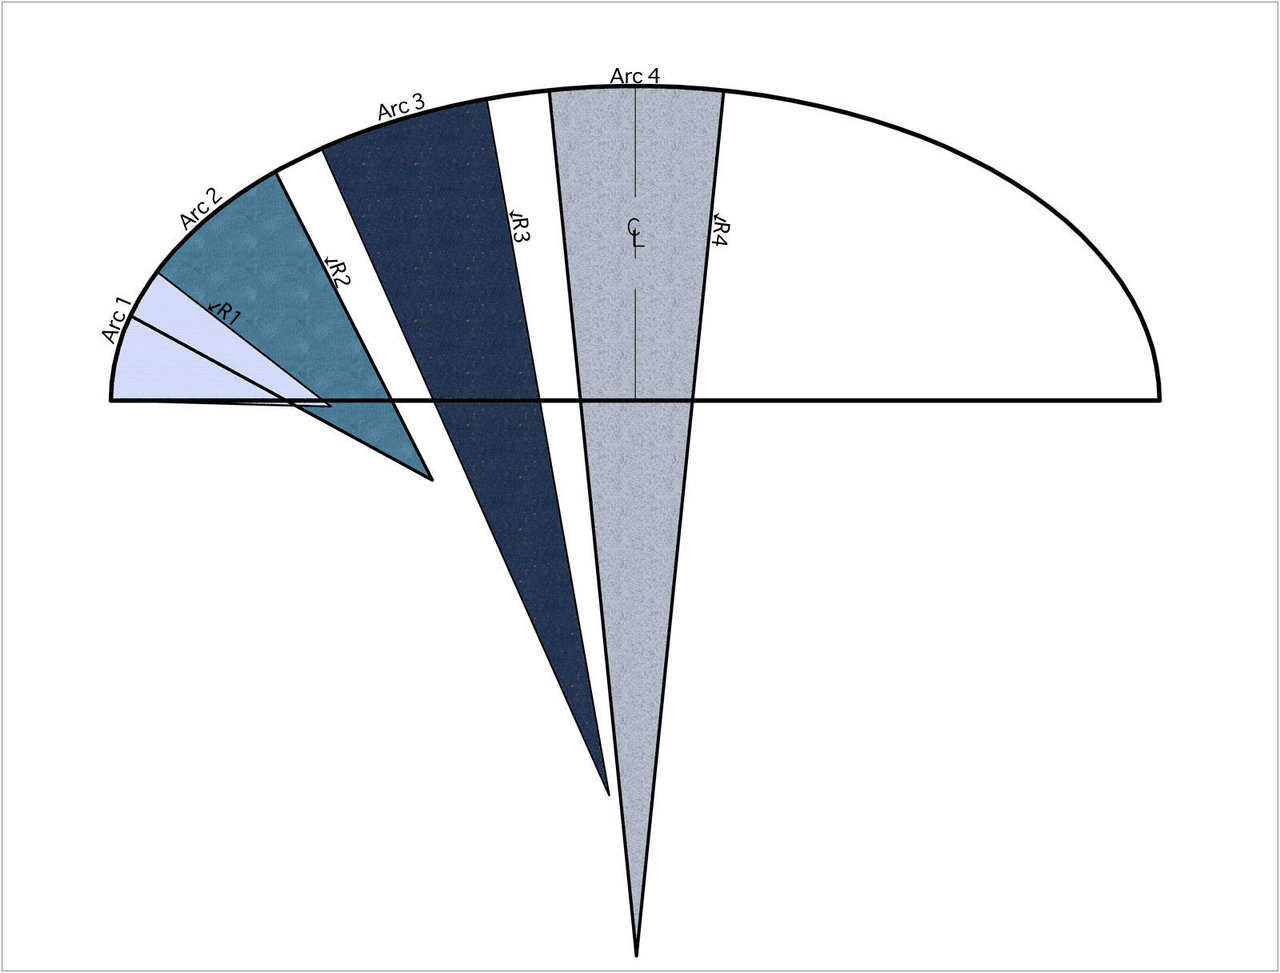 Figure 4 — The radii of the oblate ellipse ranging from smallest at the edge (R1) to largest at the top of the dome (R4).